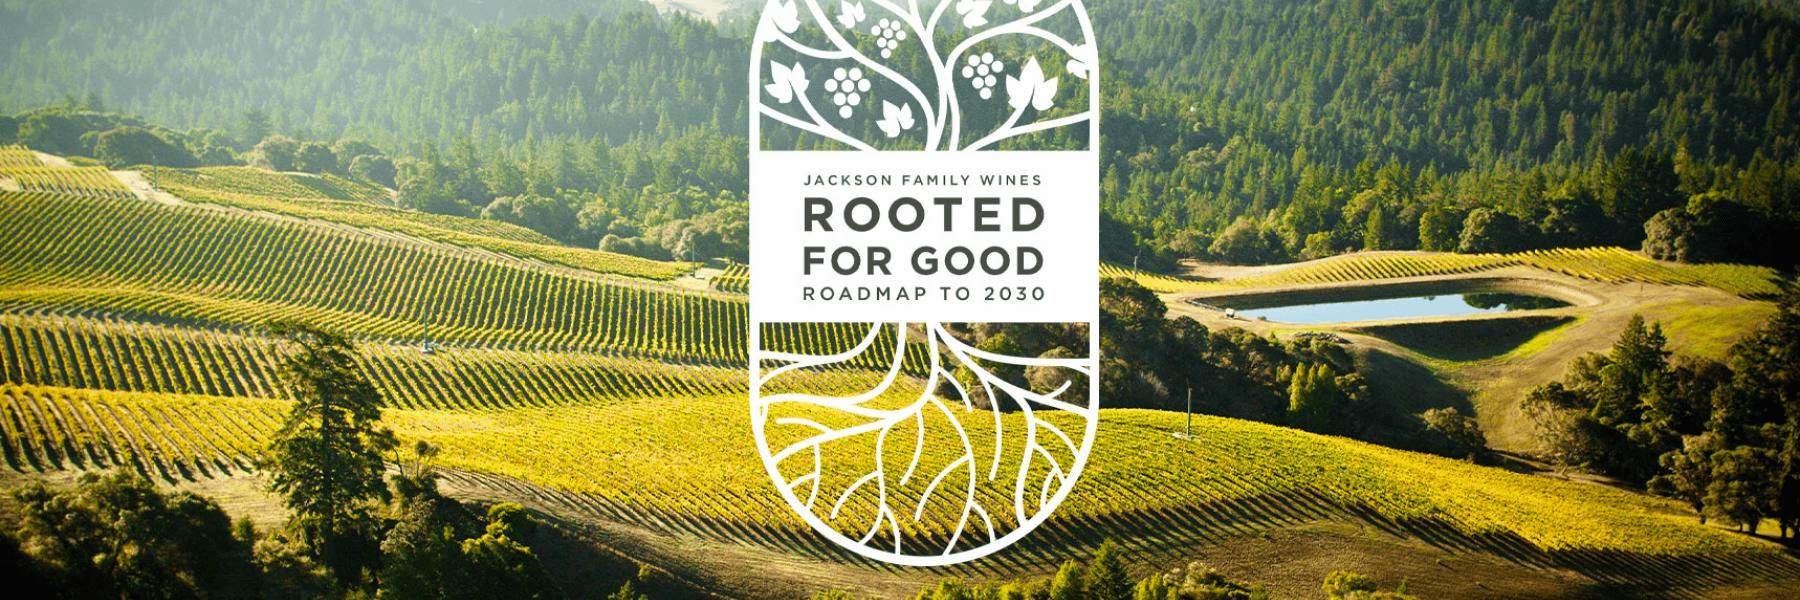 Jackson Family Wines recently launched Rooted for Good: Roadmap to 2030